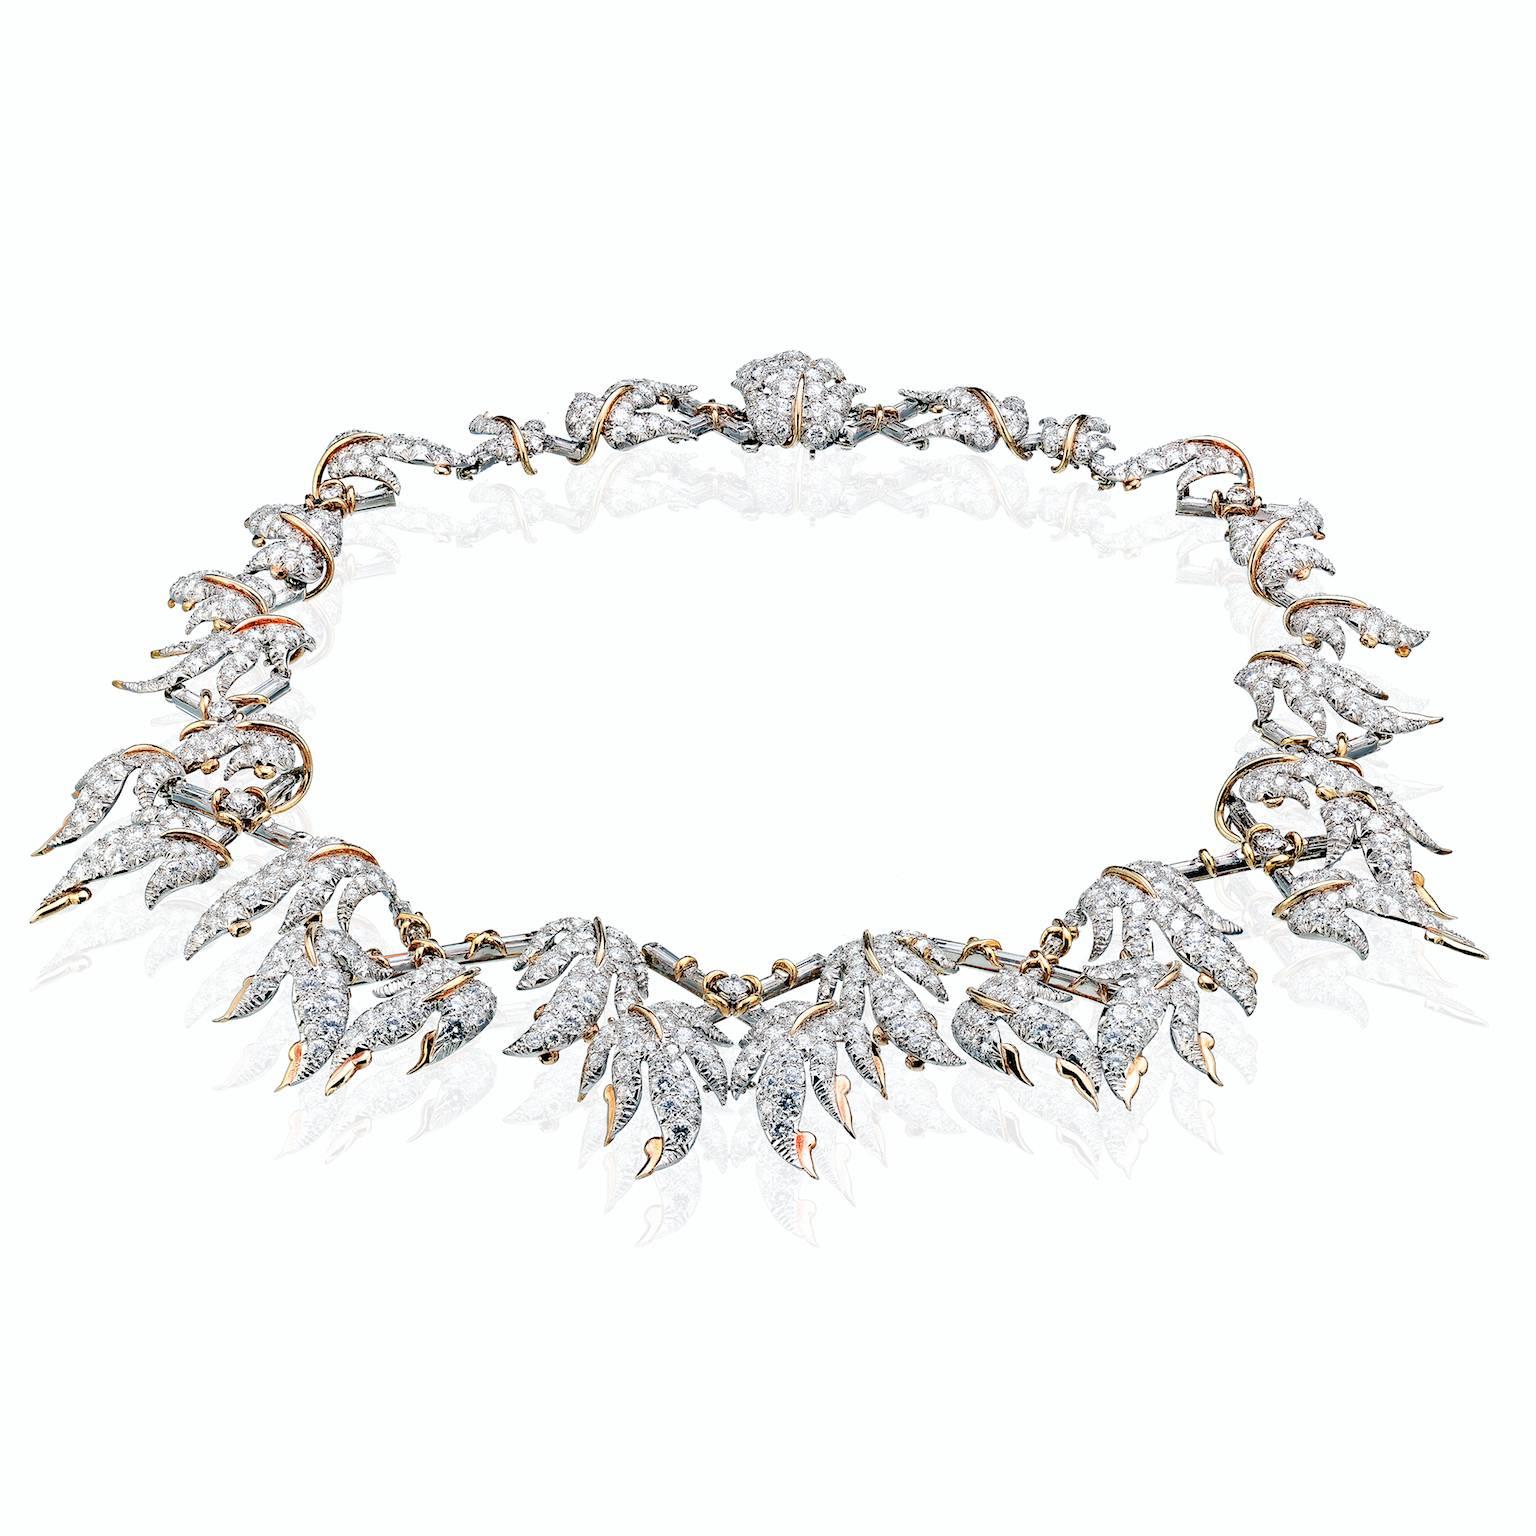 Tiffany France Schlumberger Platinum and 18K Gold Foliate Vine Necklace with Aprop. 46.25 carats Round Brilliant and Emerald Cut Diamonds.
Marked "Tiffany SchlumbergerMade in France.